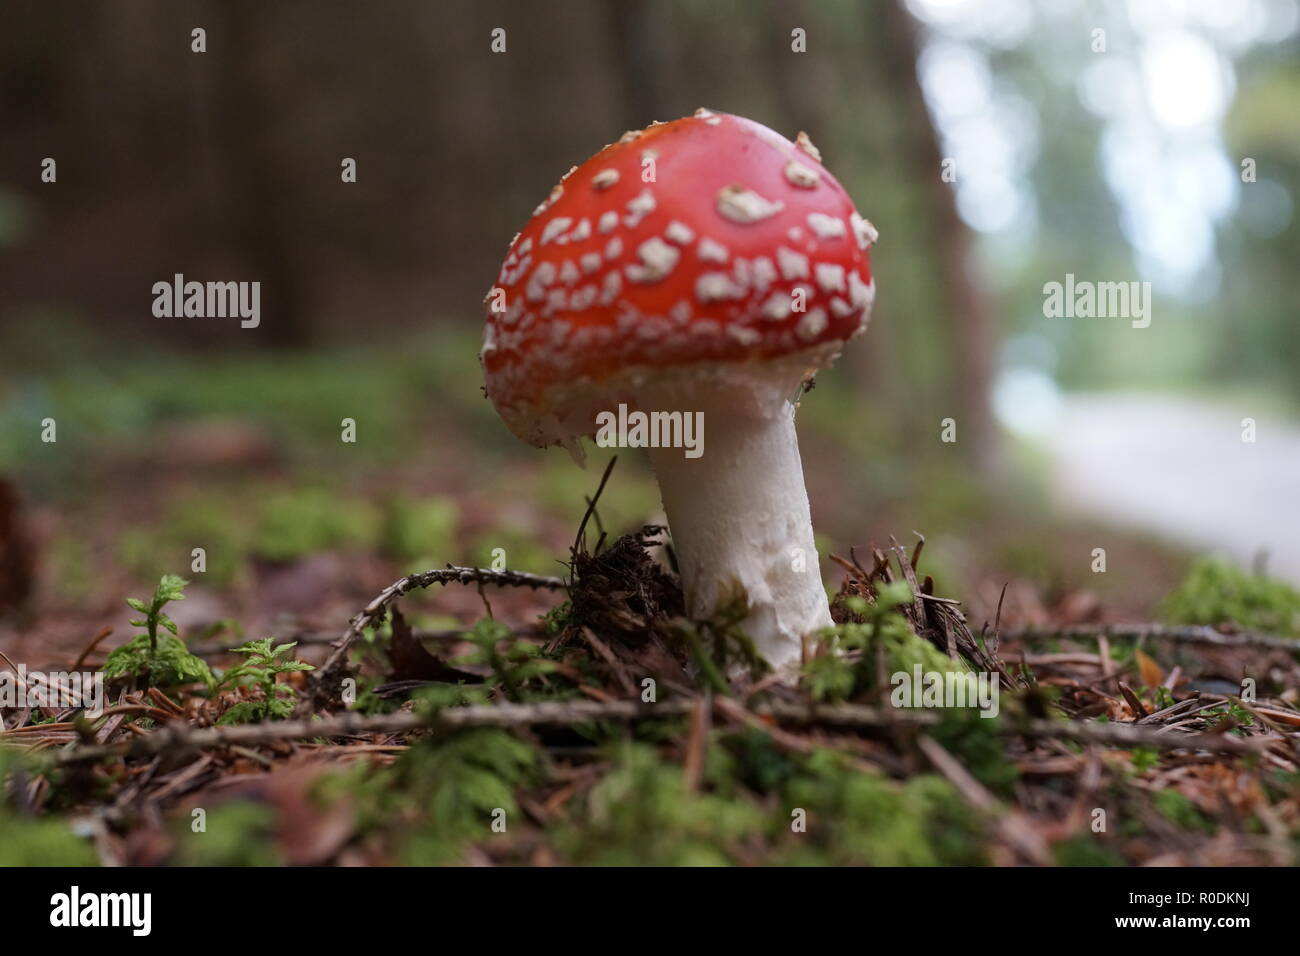 Junge fly Agaric im Wald Stockfoto